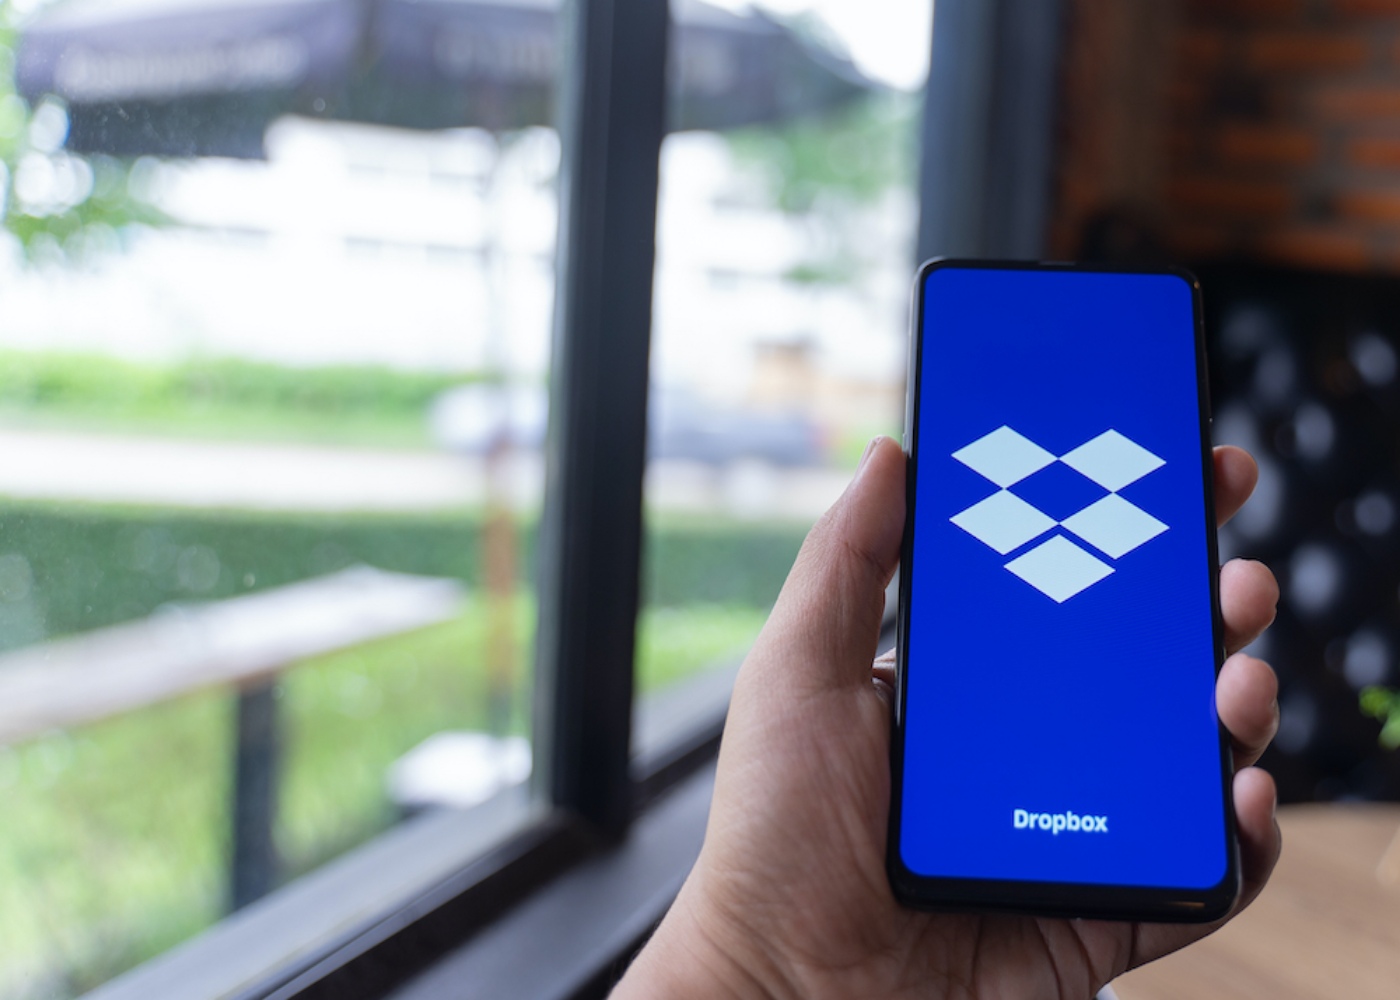 How to use dropbox in the UAE